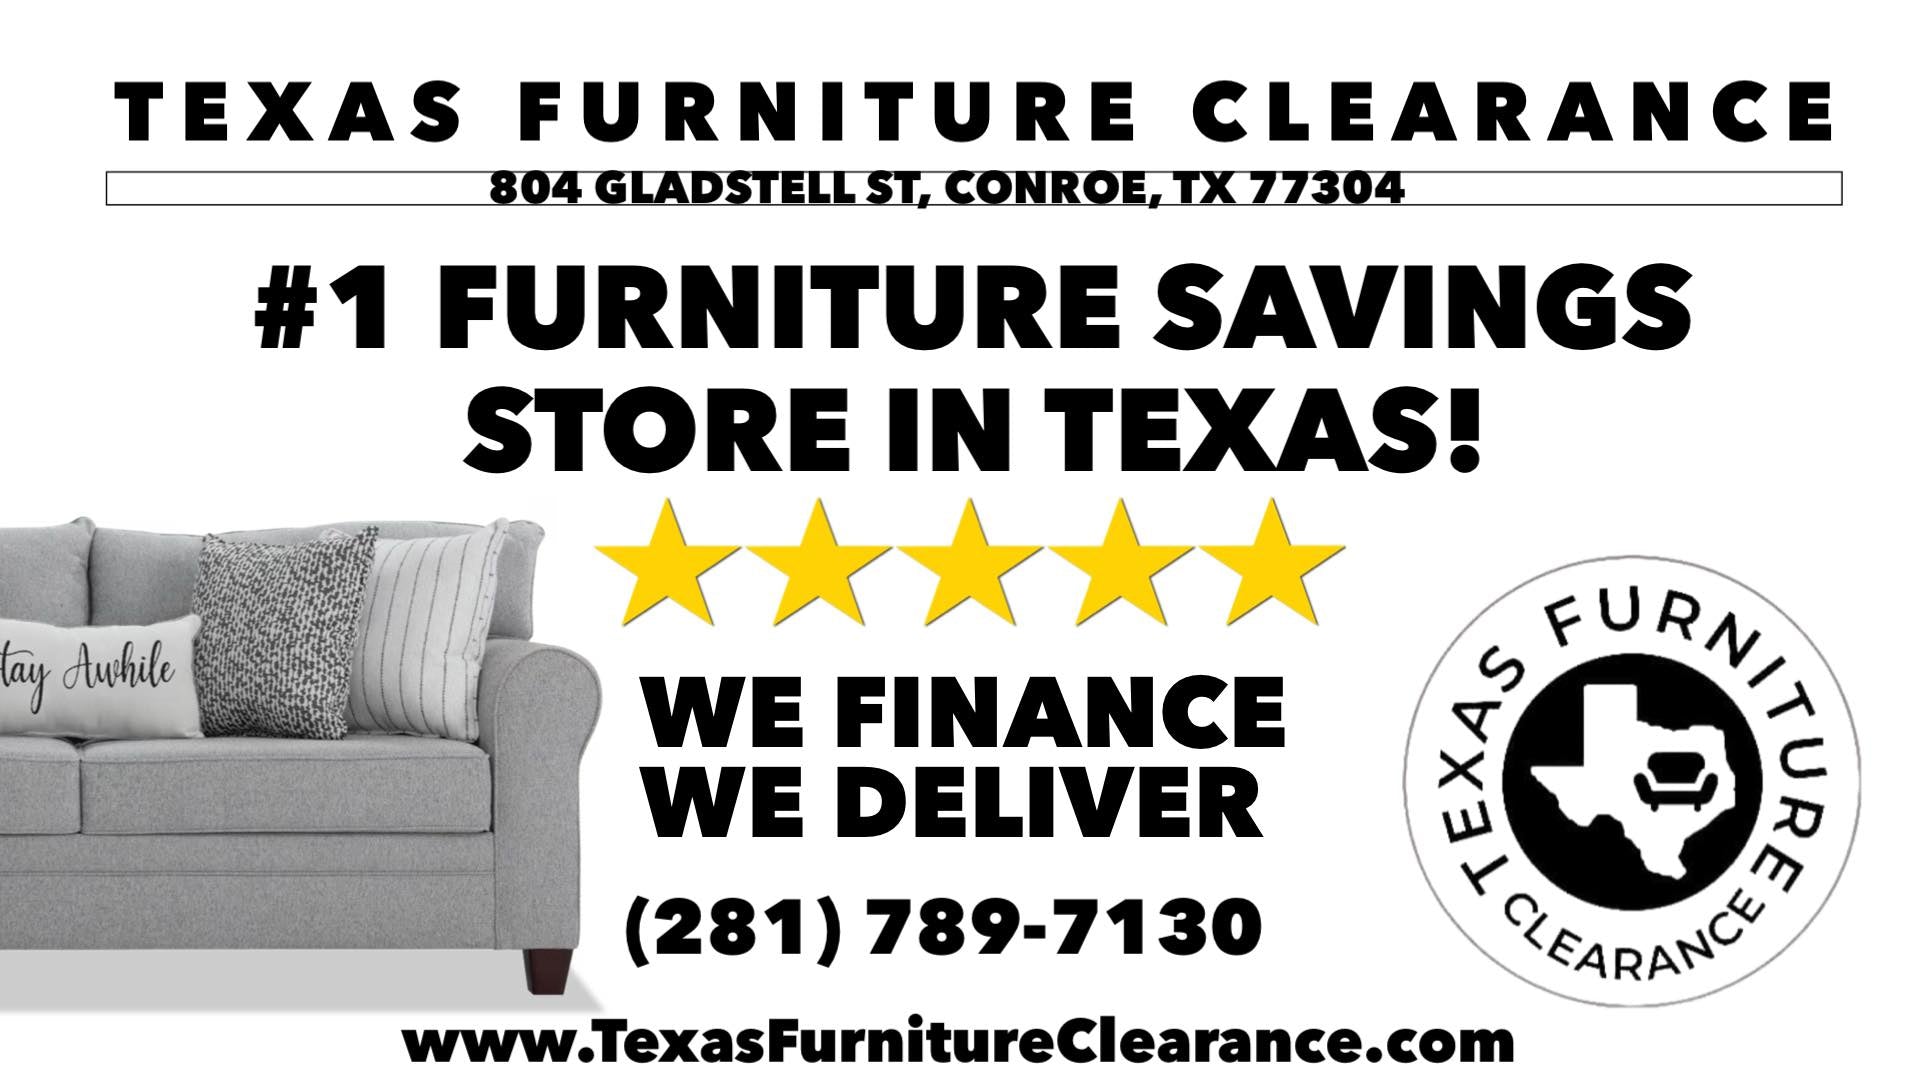 What is Clearance Furniture?